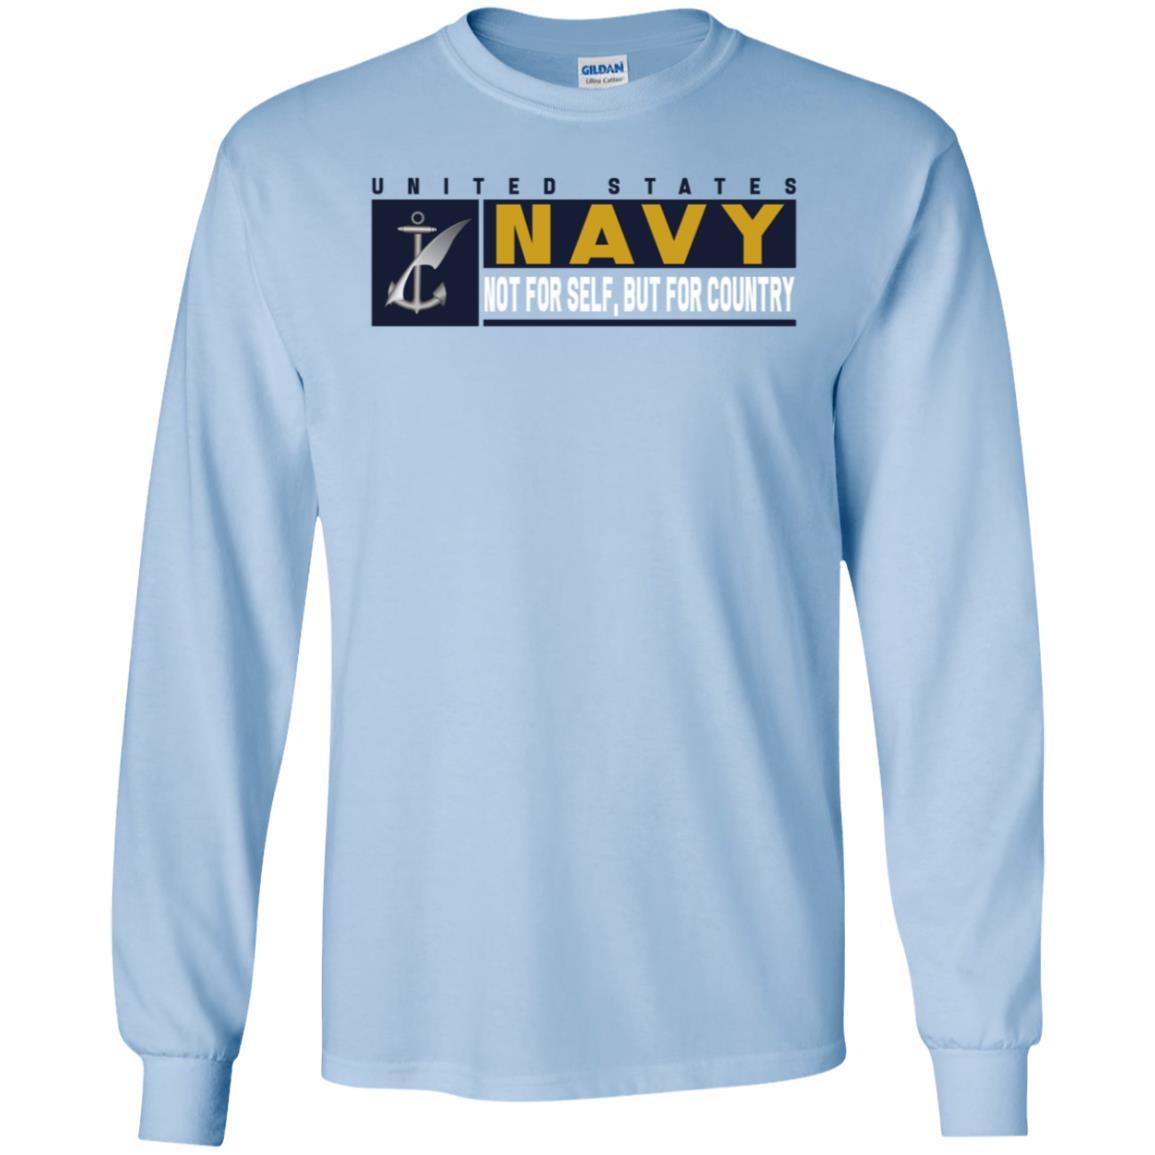 Navy Counselor Navy NC- Not for self Long Sleeve - Pullover Hoodie-TShirt-Navy-Veterans Nation